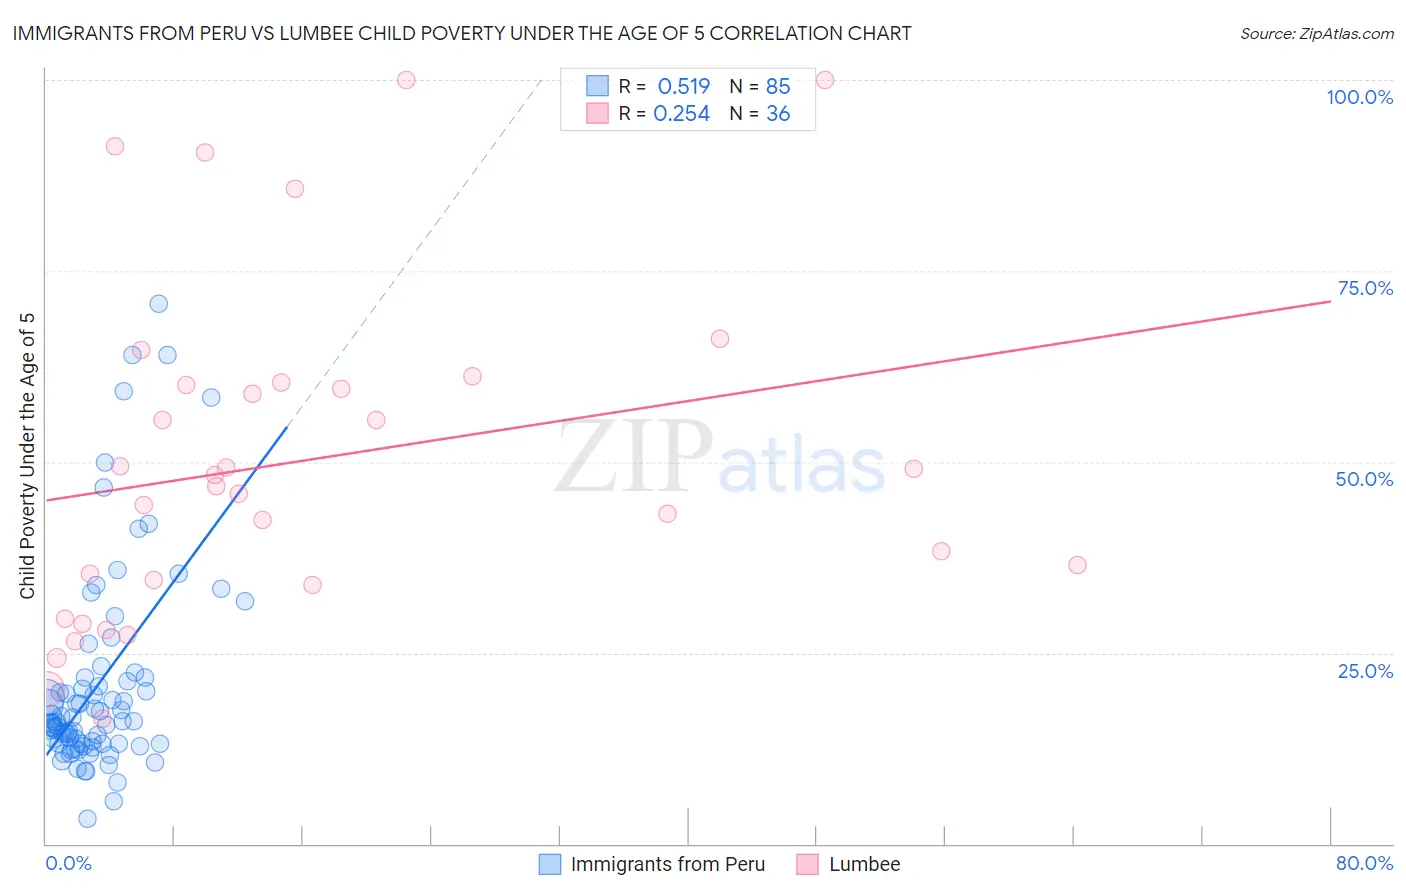 Immigrants from Peru vs Lumbee Child Poverty Under the Age of 5